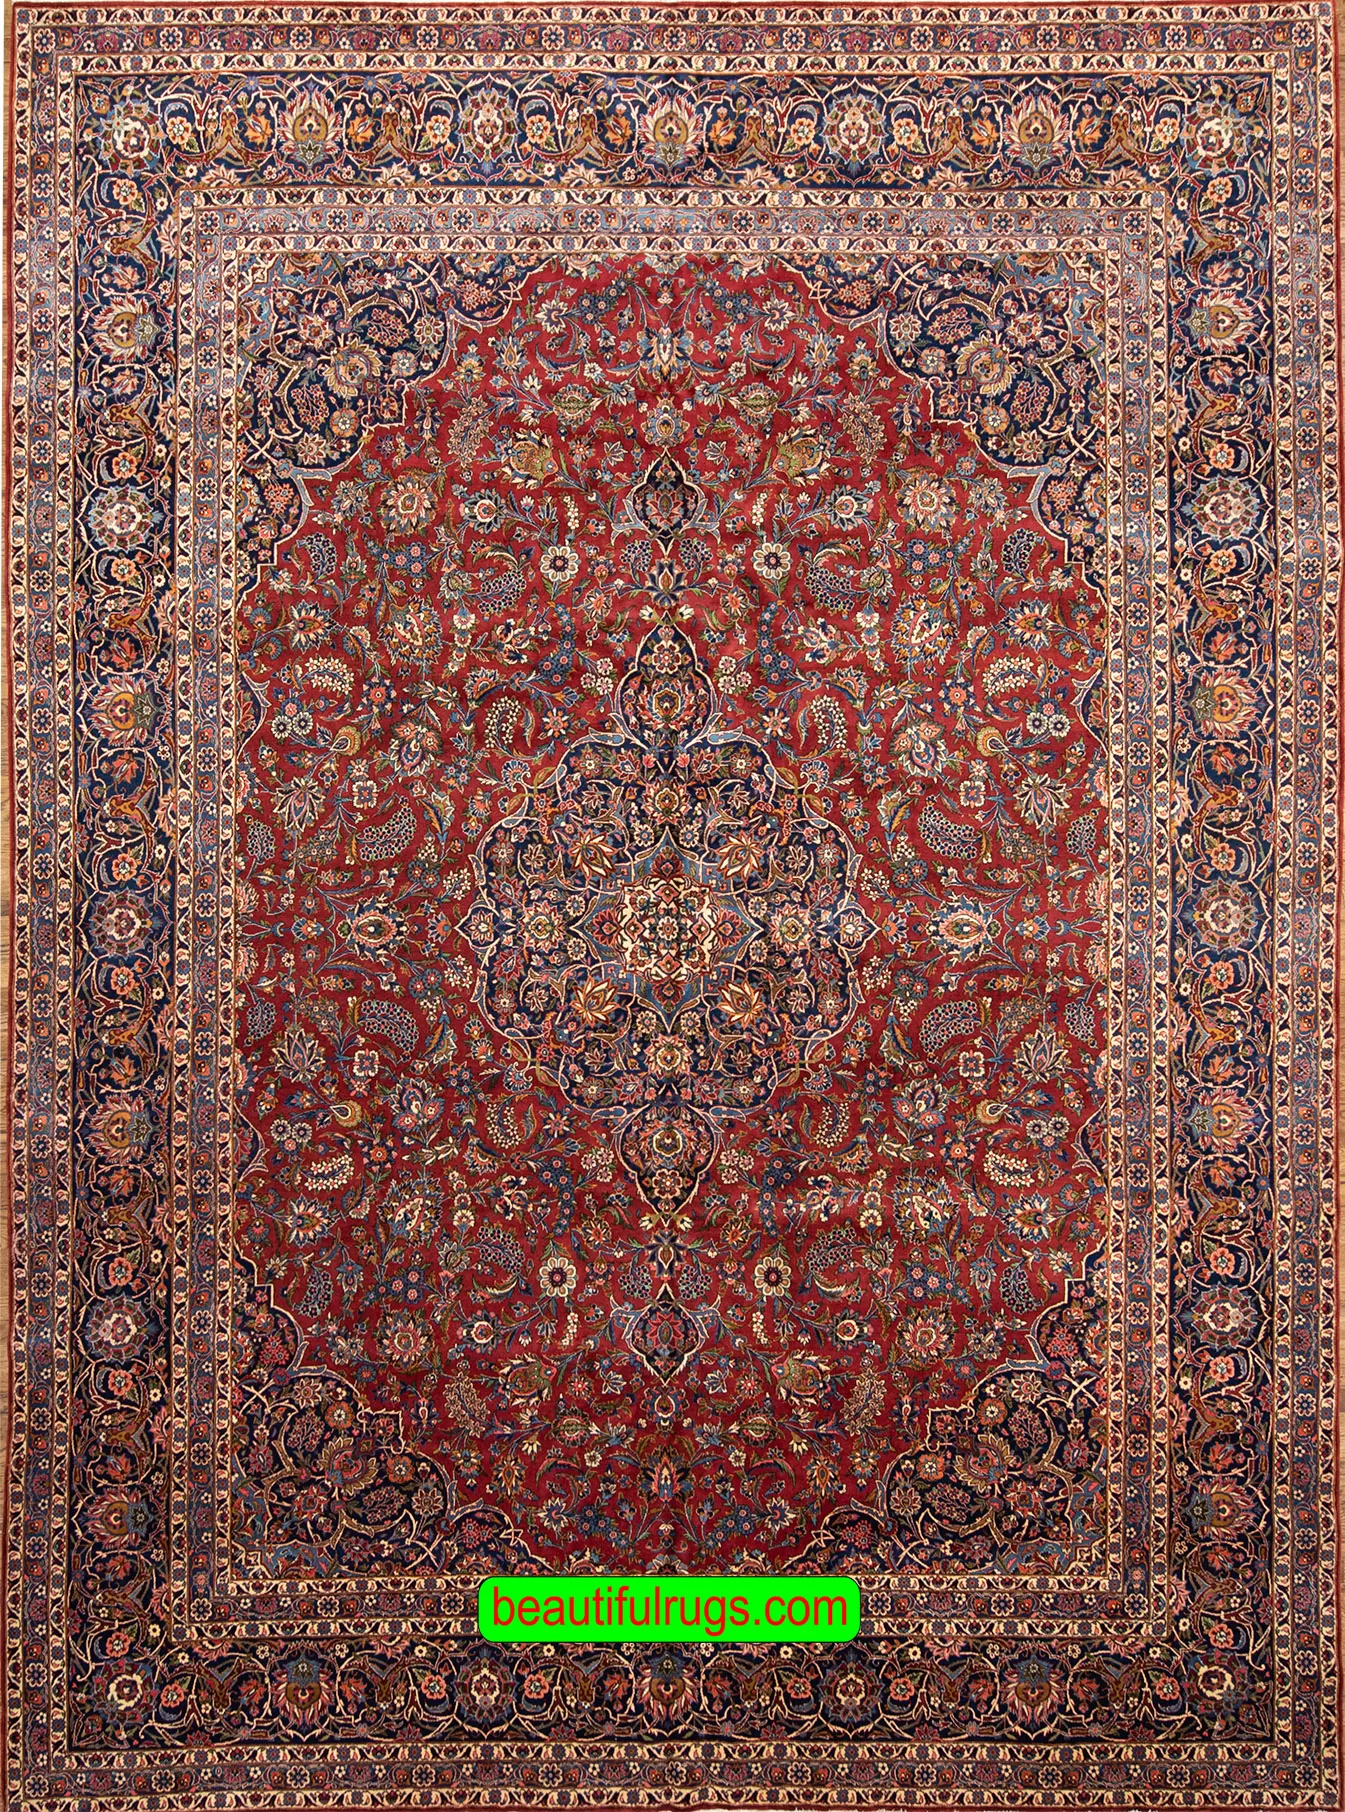 Semi antique Persian Kashan rug with orange red and navy blue color. Size 11.3x14.7.